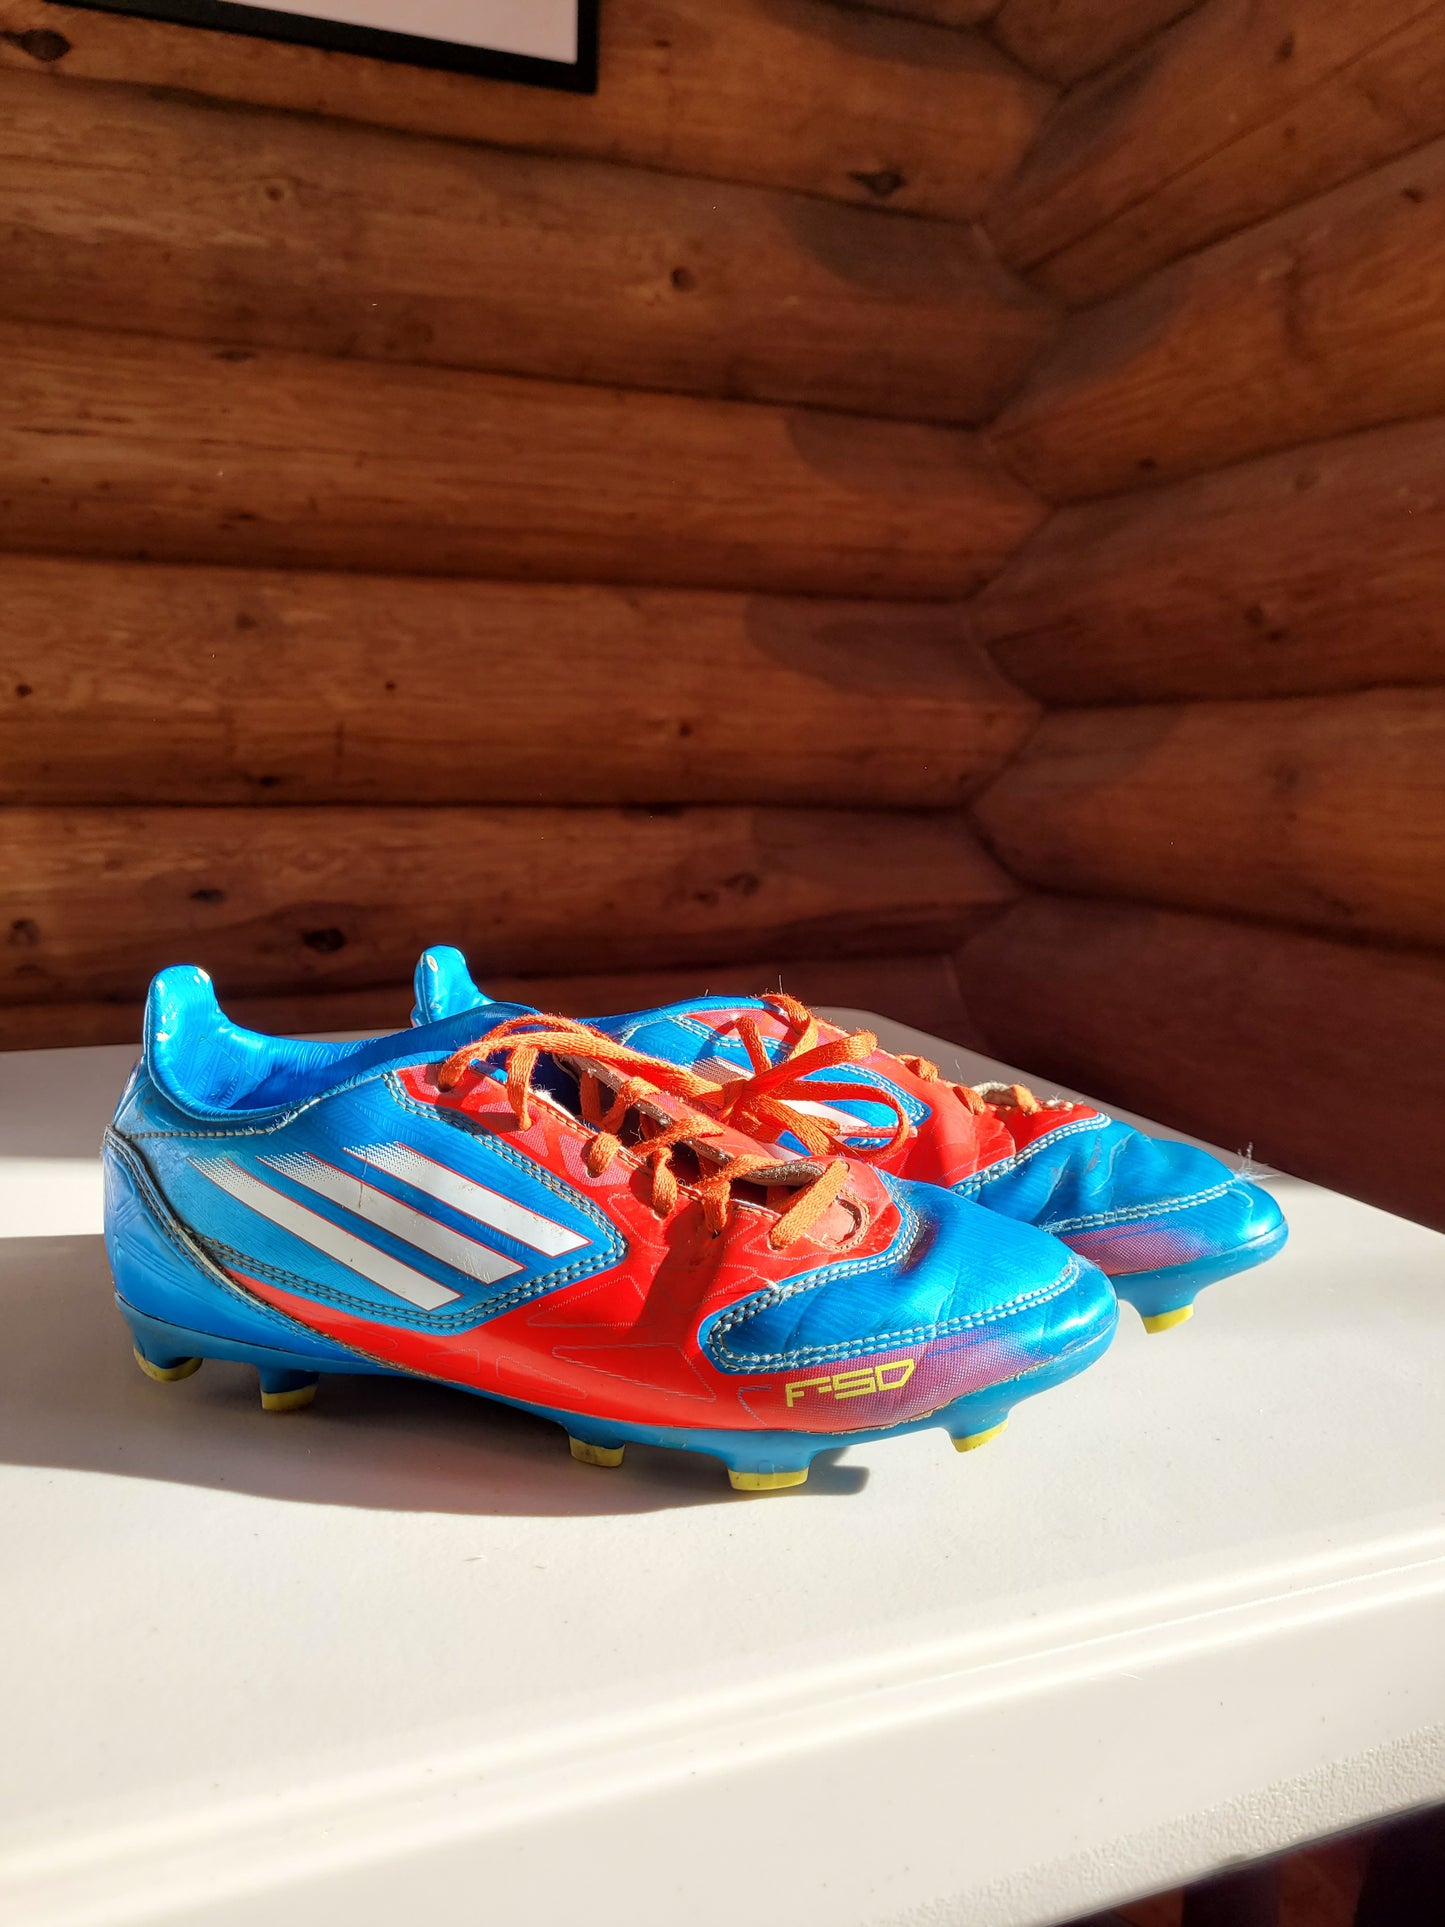 USED - Size 4 Adidas Soccer Cleats